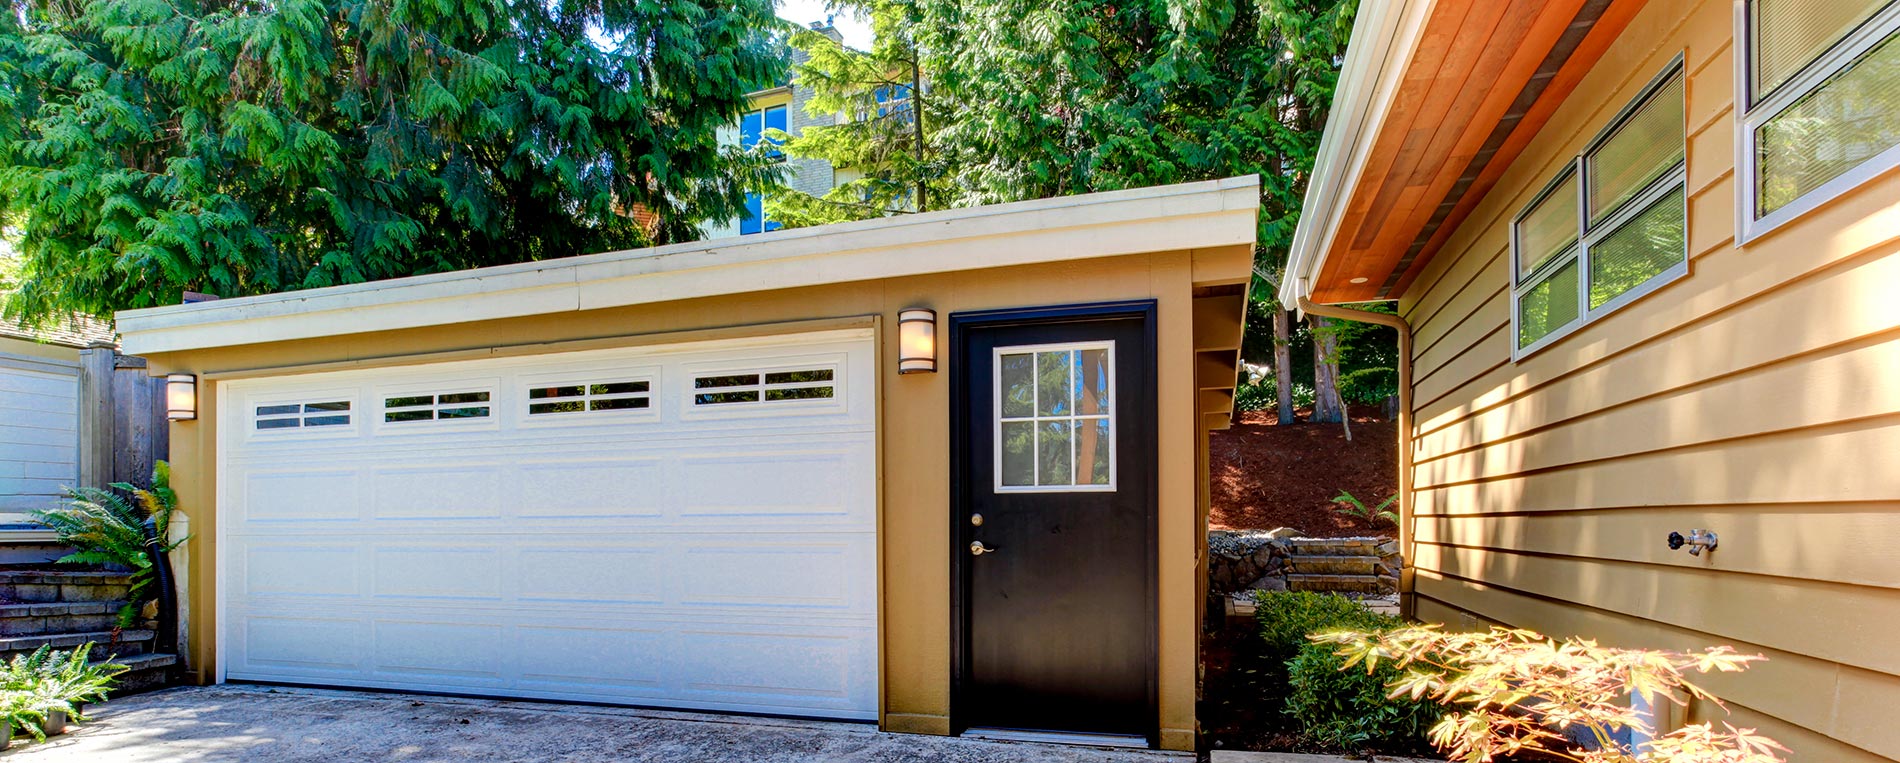 Why Garage Door Security Features Are Important